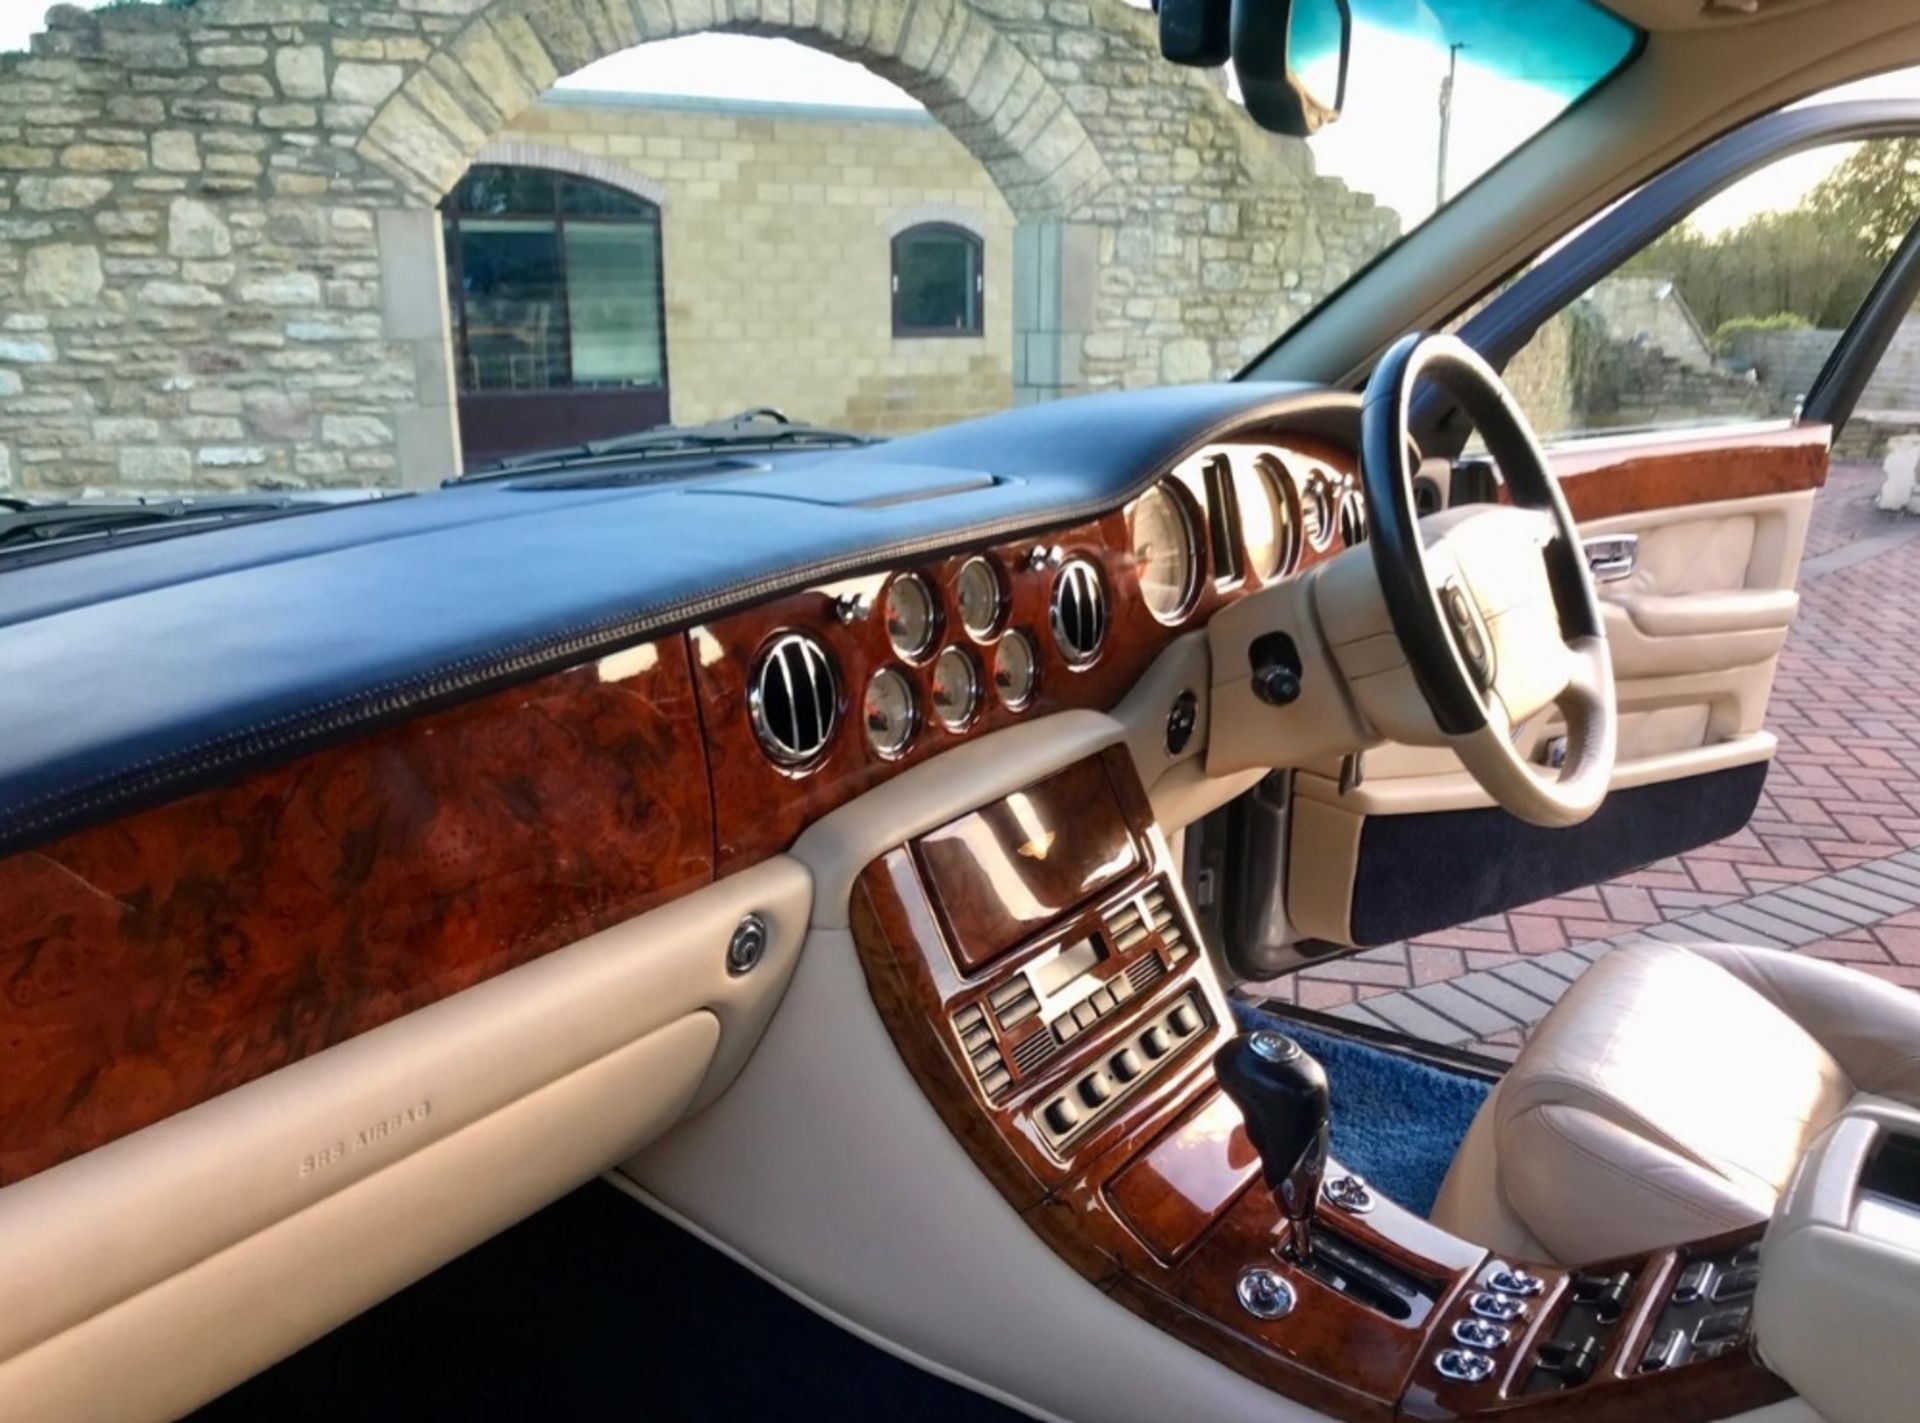 2003 BENTLEY ARNAGE R Registration Number: MX03 WSY Chassis Number: TBA Recorded Mileage: 54,214 - Image 8 of 13